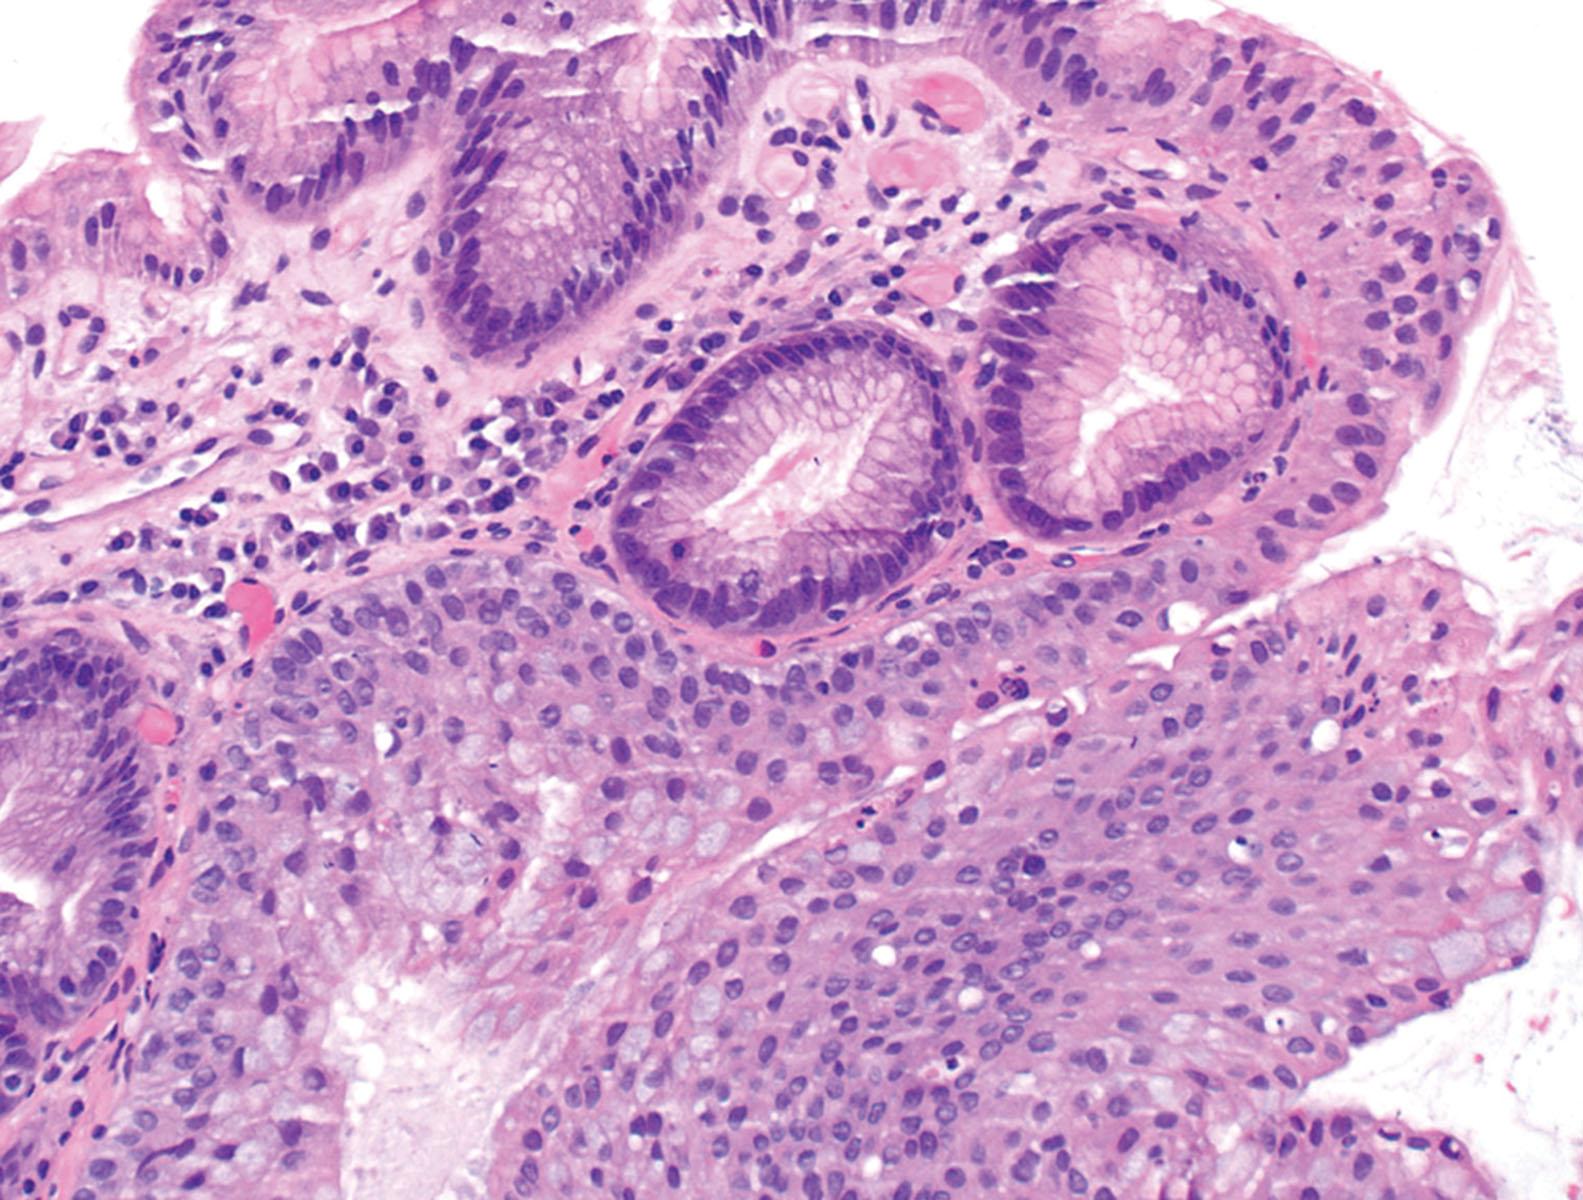 Figure 2.7, Multilayered epithelium (hematoxylin and eosin) is a hybrid epithelium demonstrating features of both squamous and columnar differentiation and suggested by may be a precursor of Barrett’s esophagus.